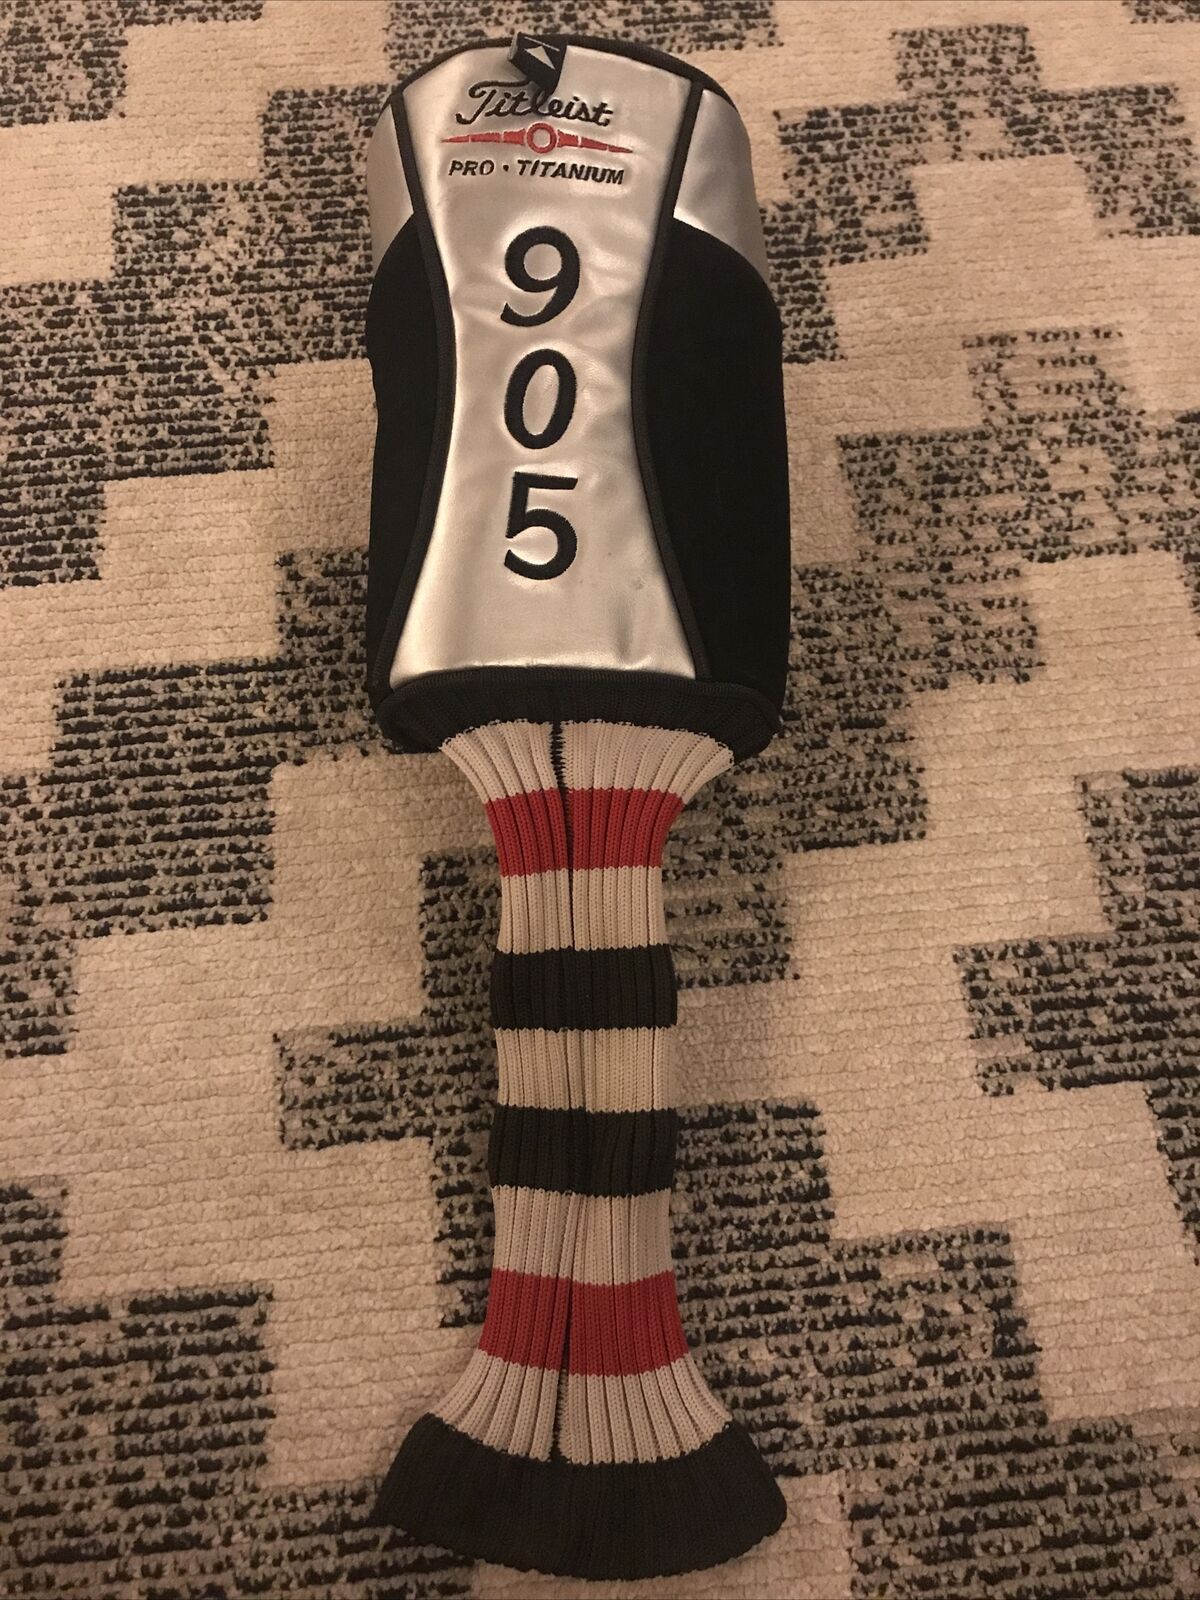 Titleist 905 Driver HeadCover Club Cover Golf